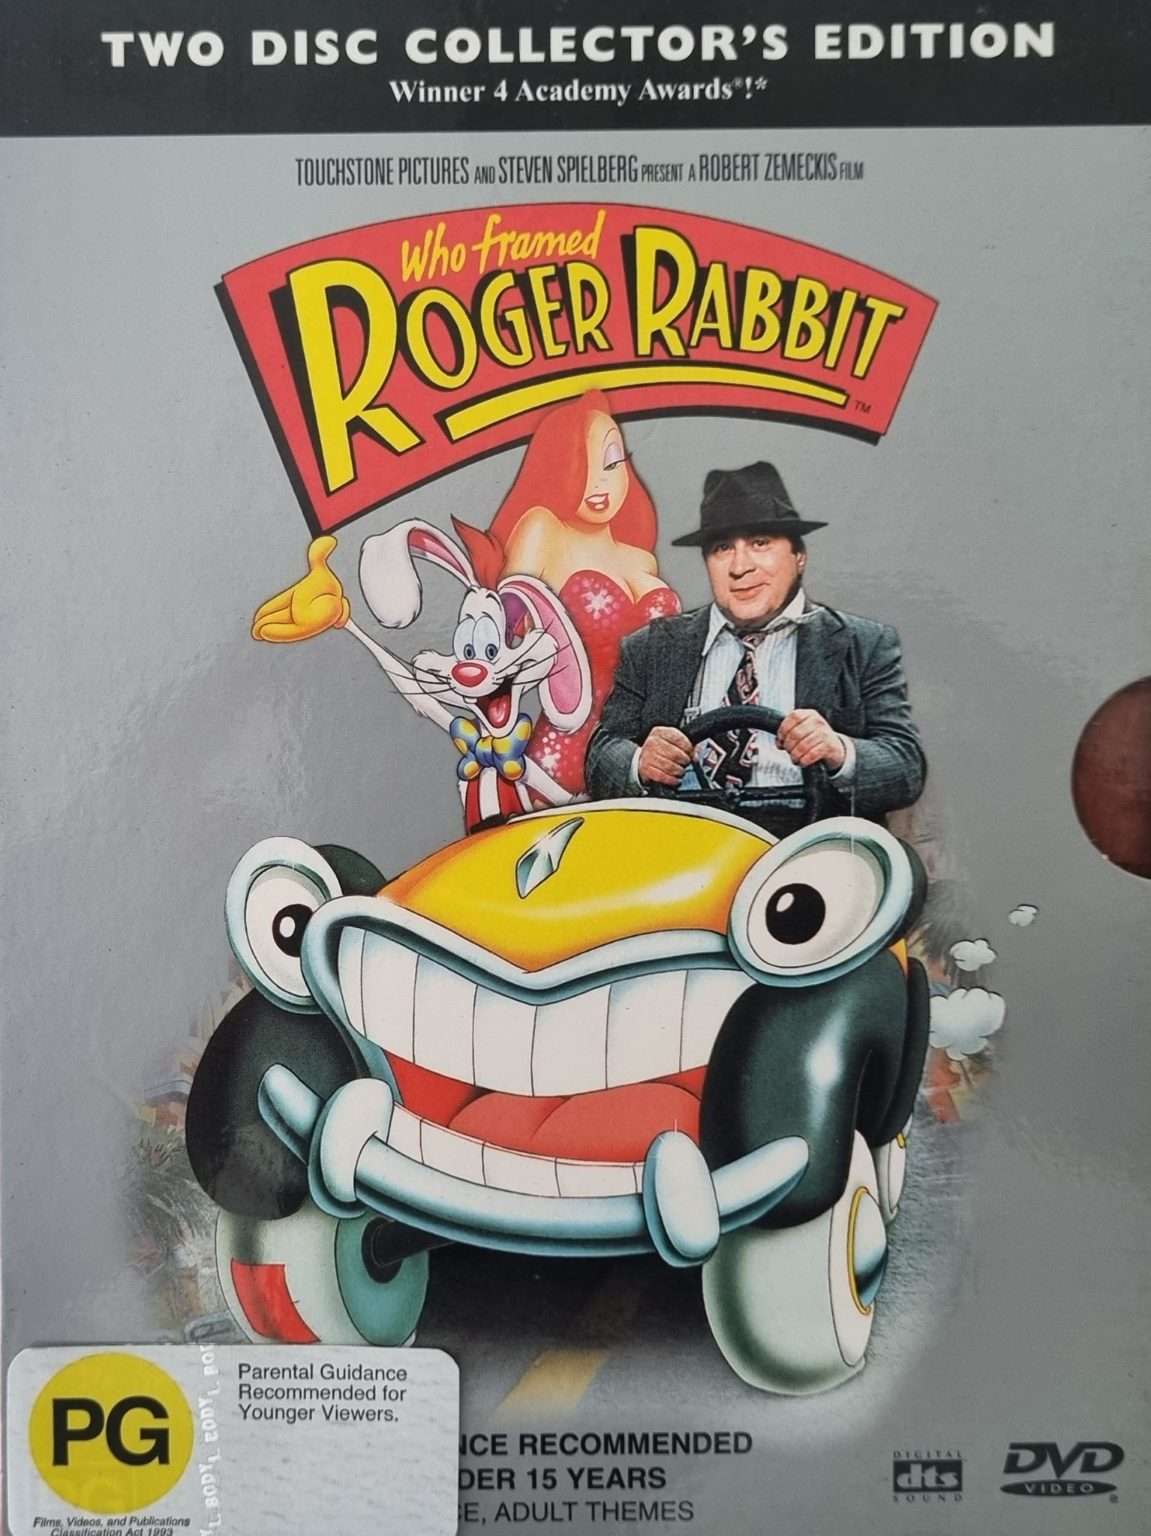 Who Framed Roger Rabbit - Two Disc Collector's Edition